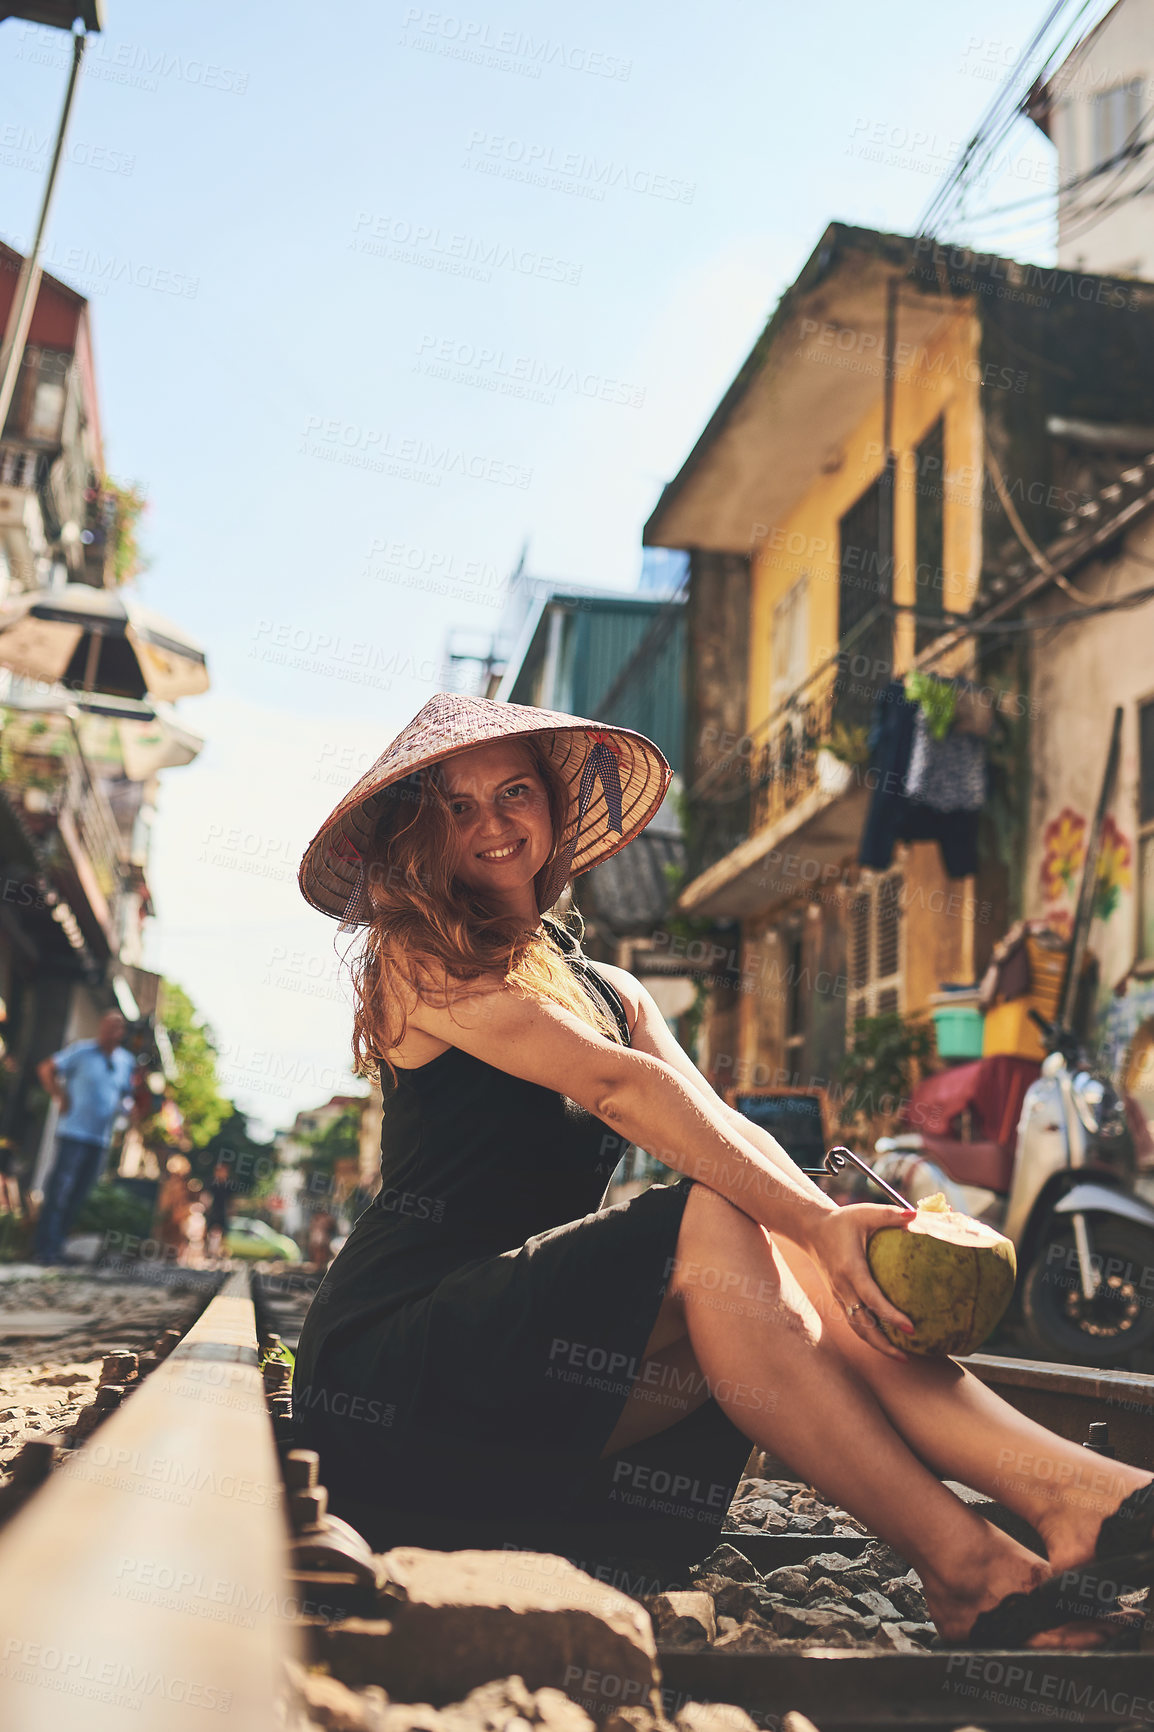 Buy stock photo Shot of a woman having coconut water while relaxing on the train tracks in the streets of Vietnam